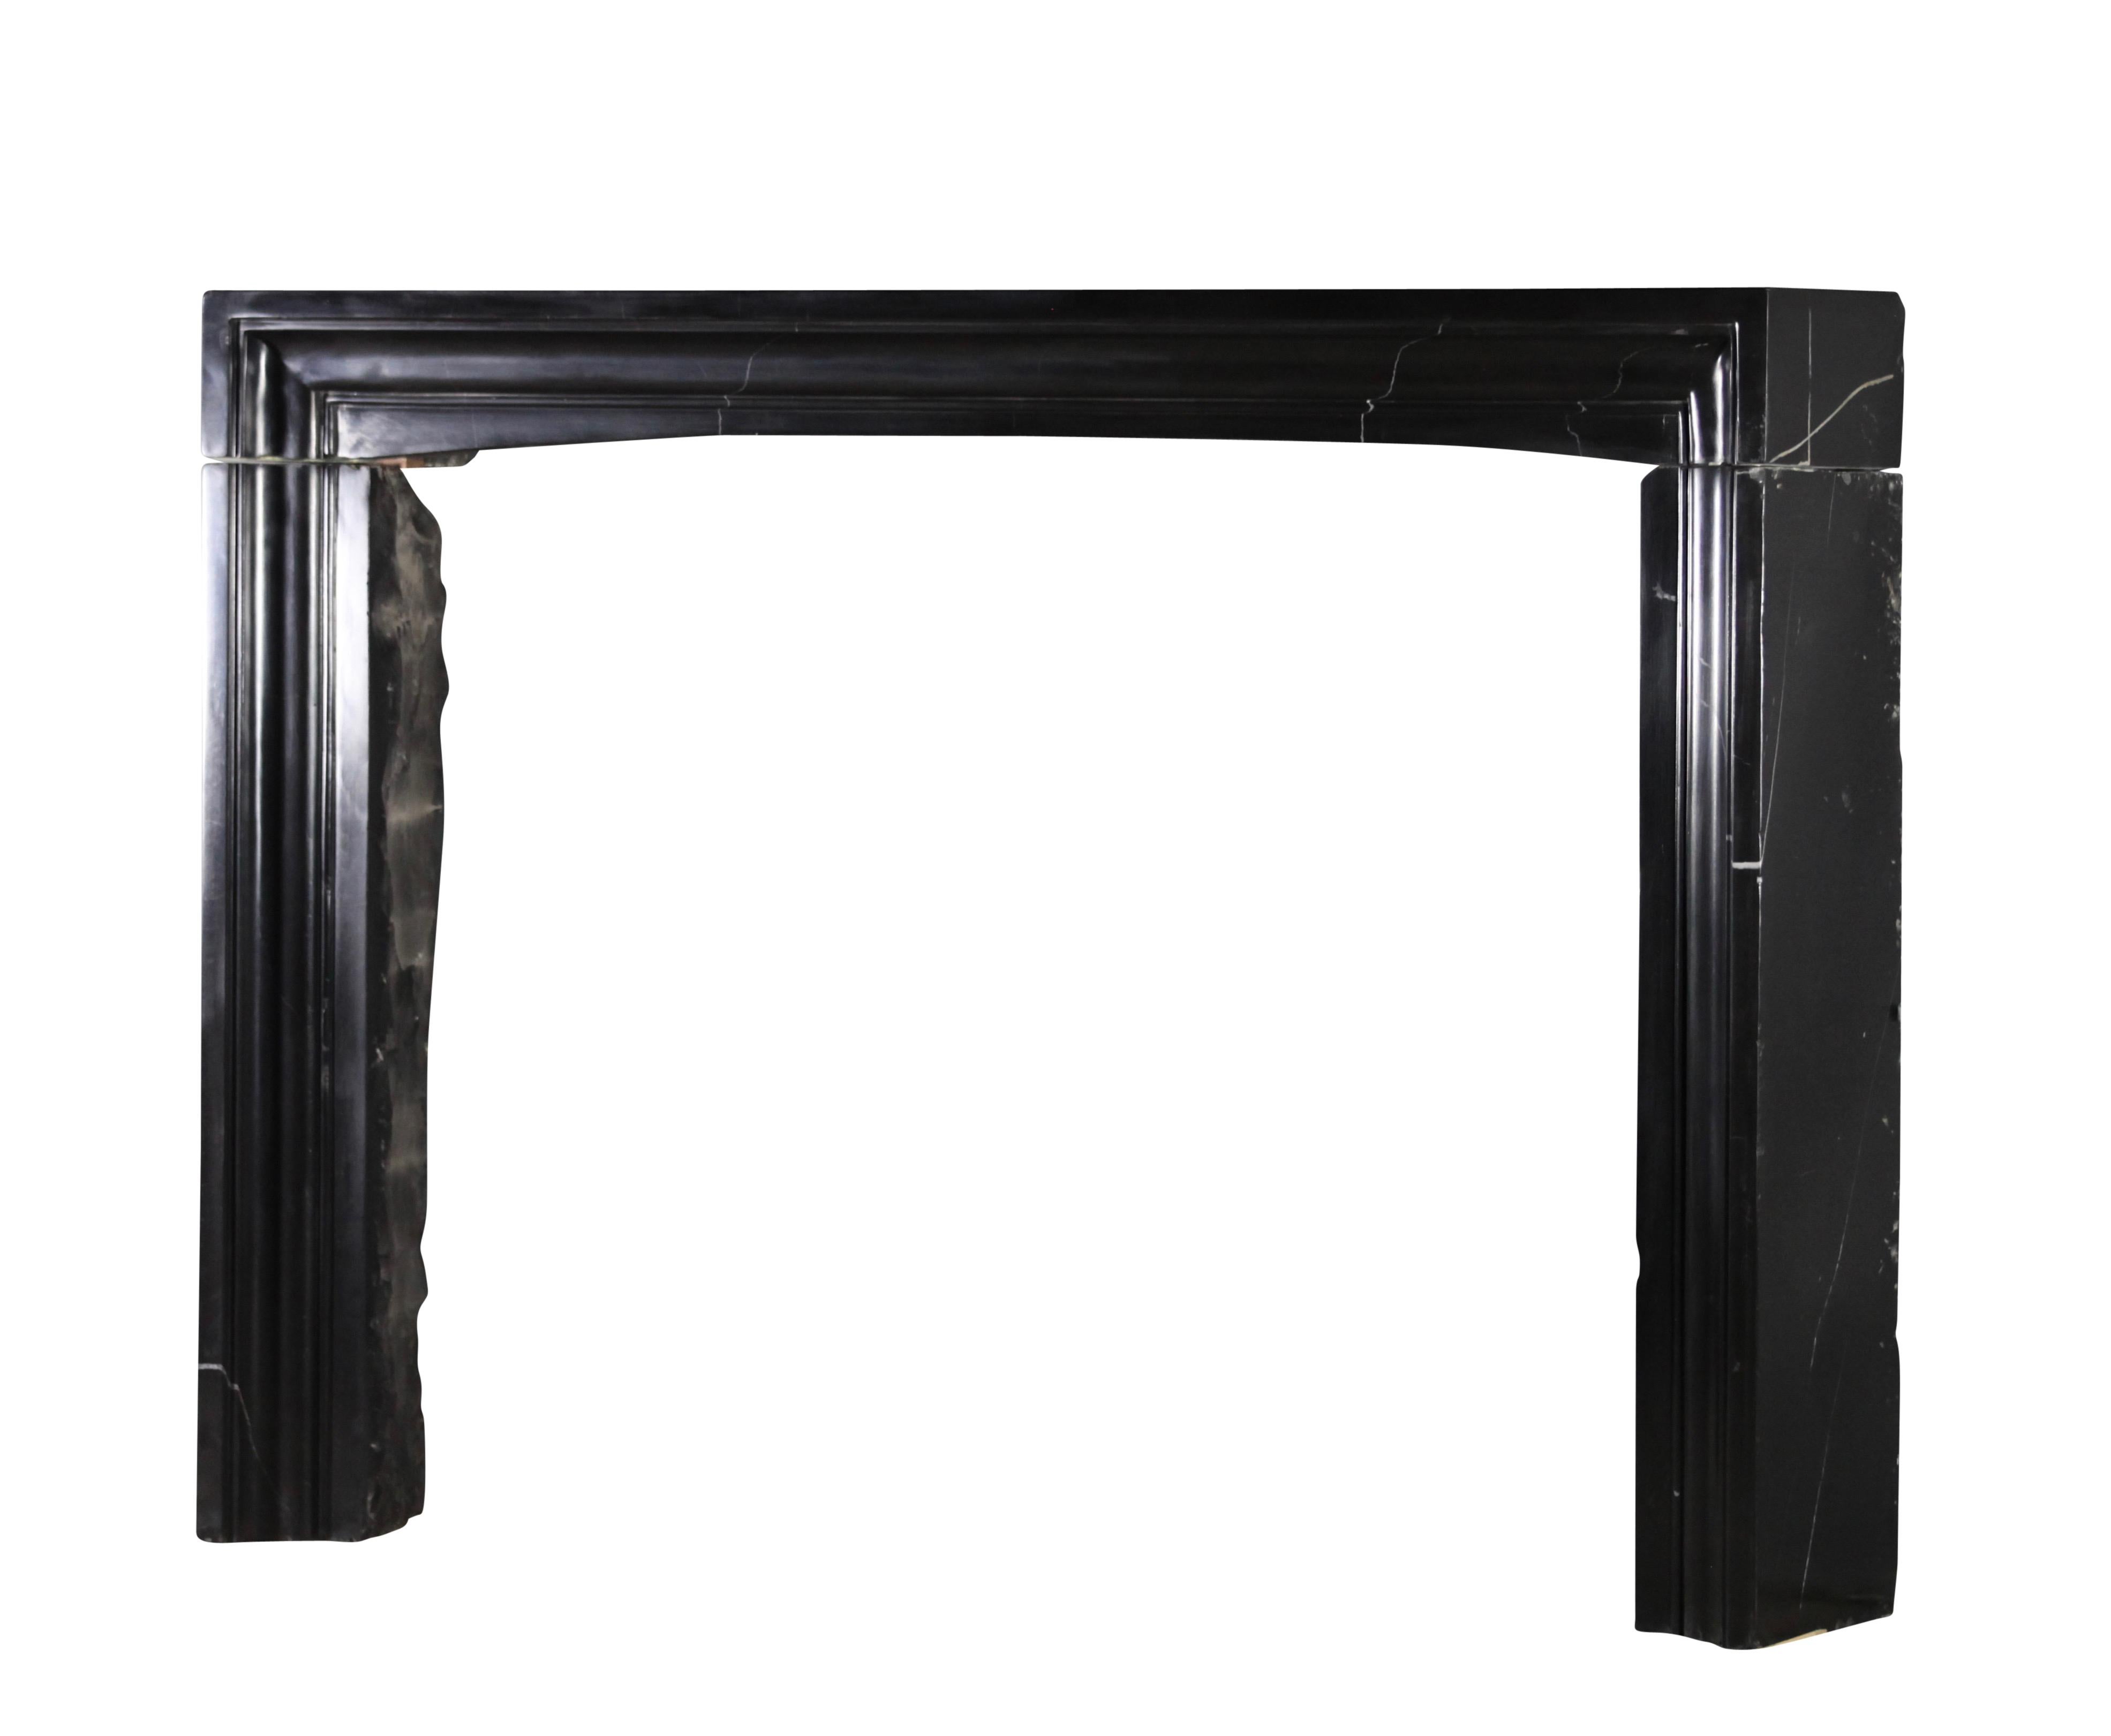 This one of a kind original antique fireplace mantle is one of a collection of four that was reclaimed out of a Brussels great Maison de Maître house. The mantle is executed in the bespoke Black Belgian Marble. This strong piece is a perfect fit